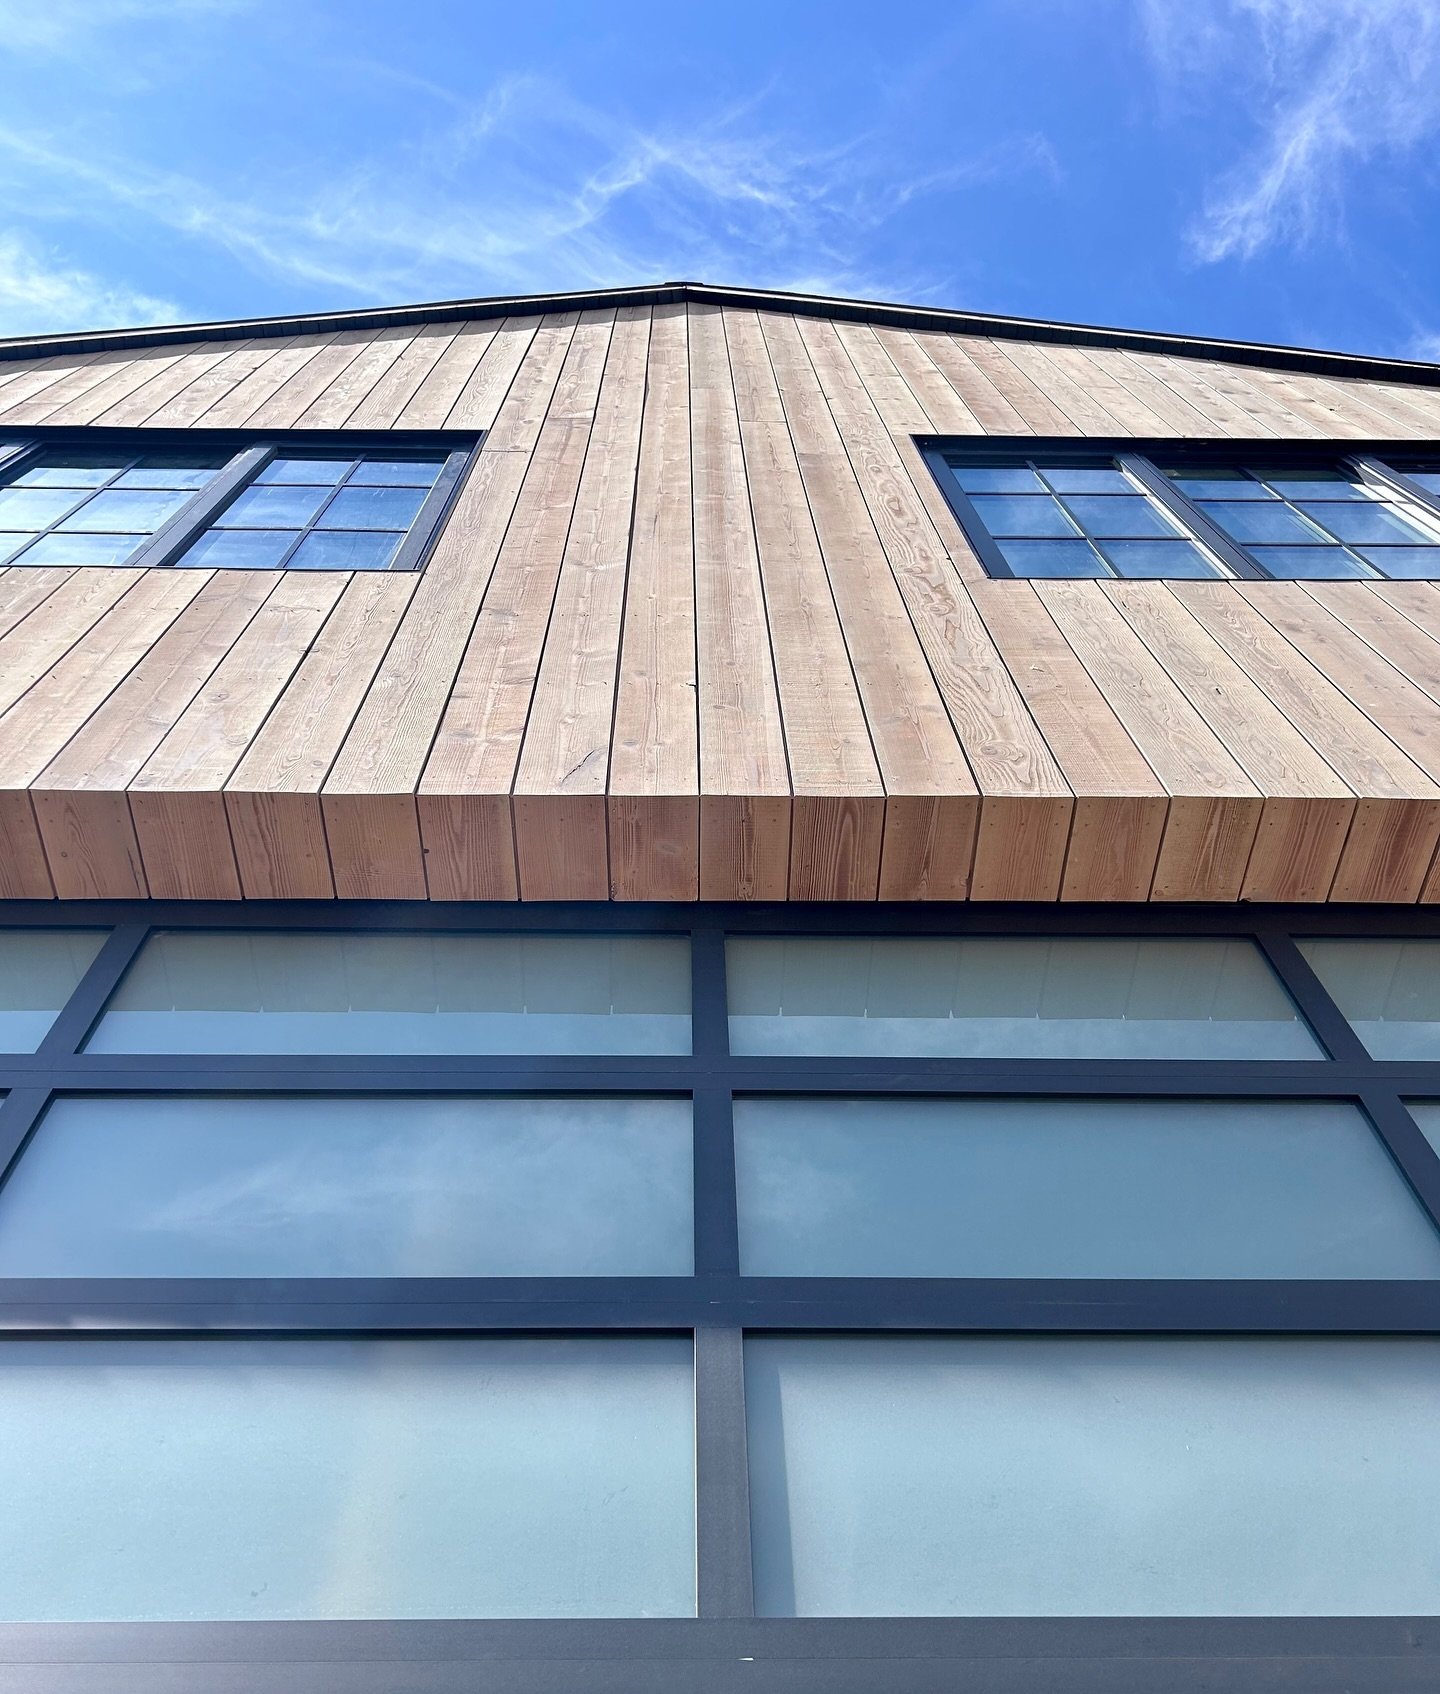 Clean lines on this mitered corner trim element. Douglas Fir is an amazing product for exterior siding. The stain choice here shows off the natural grains. 

Builder - @pointsnorthbuild 

REAL WOOD PRODUCTS - Siding | Timbers | Box Beams | Flooring |